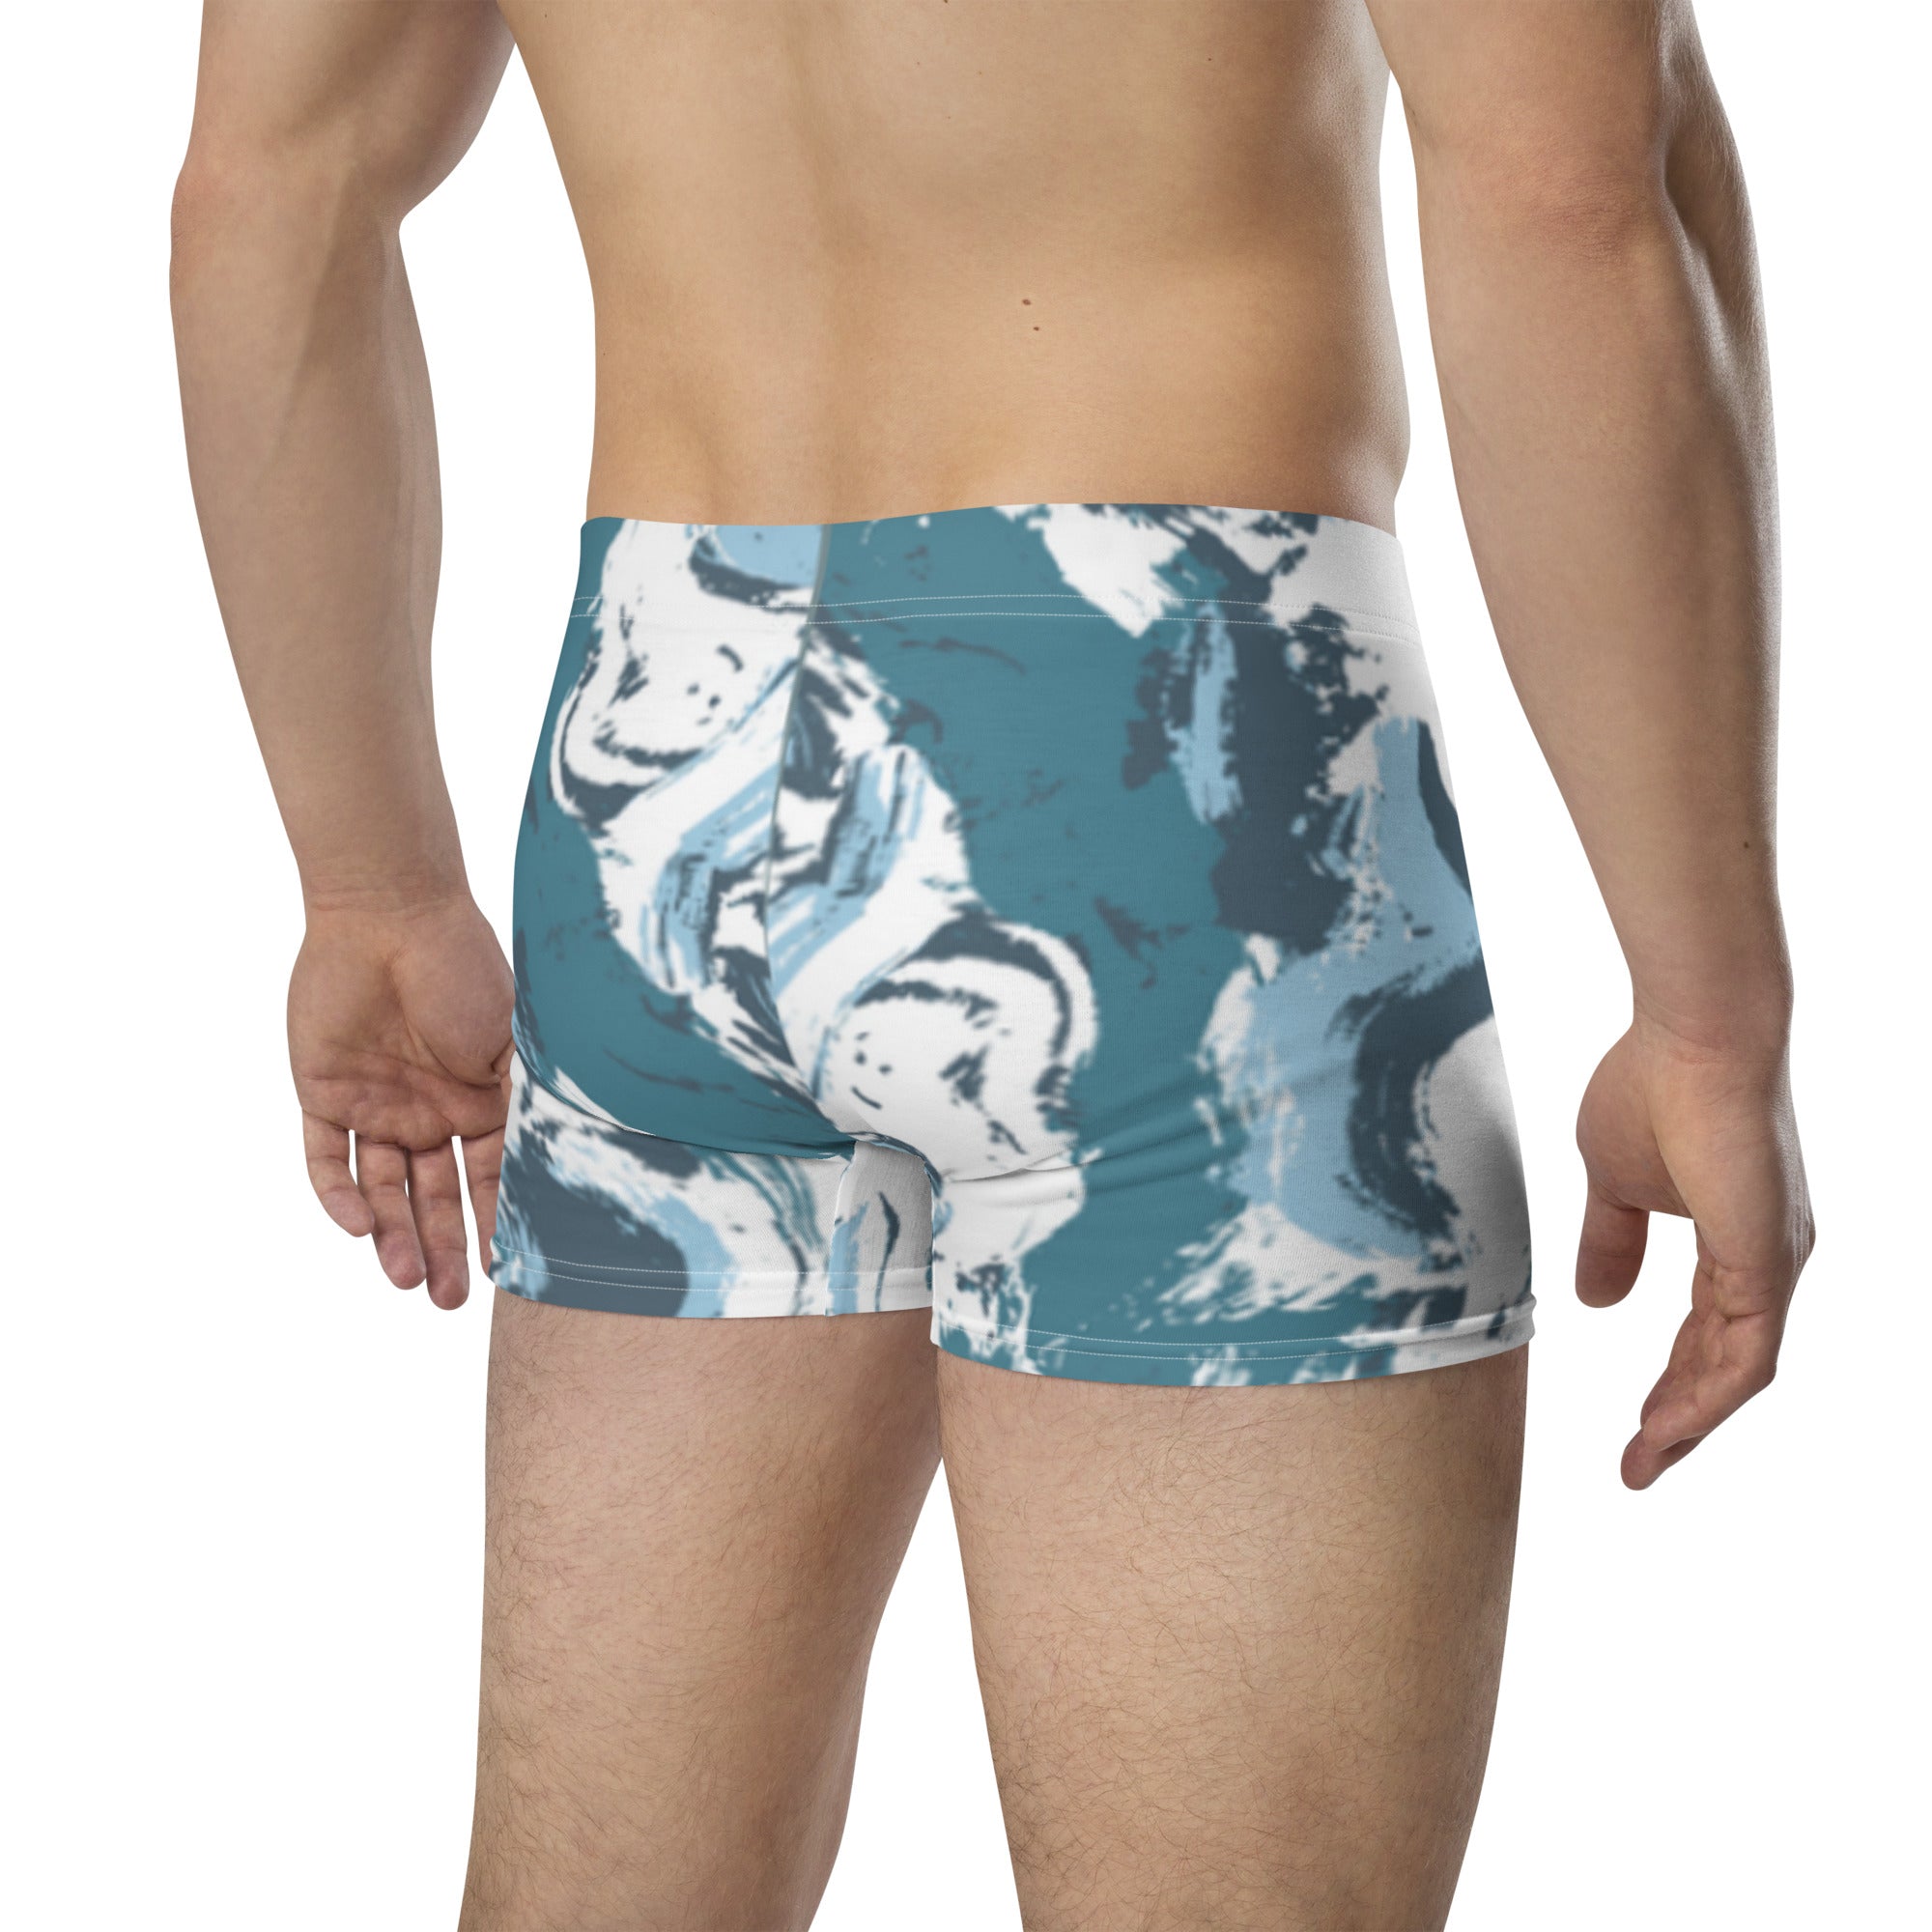 Anacotte Athletic Soft and Stretchy Boxer Briefs